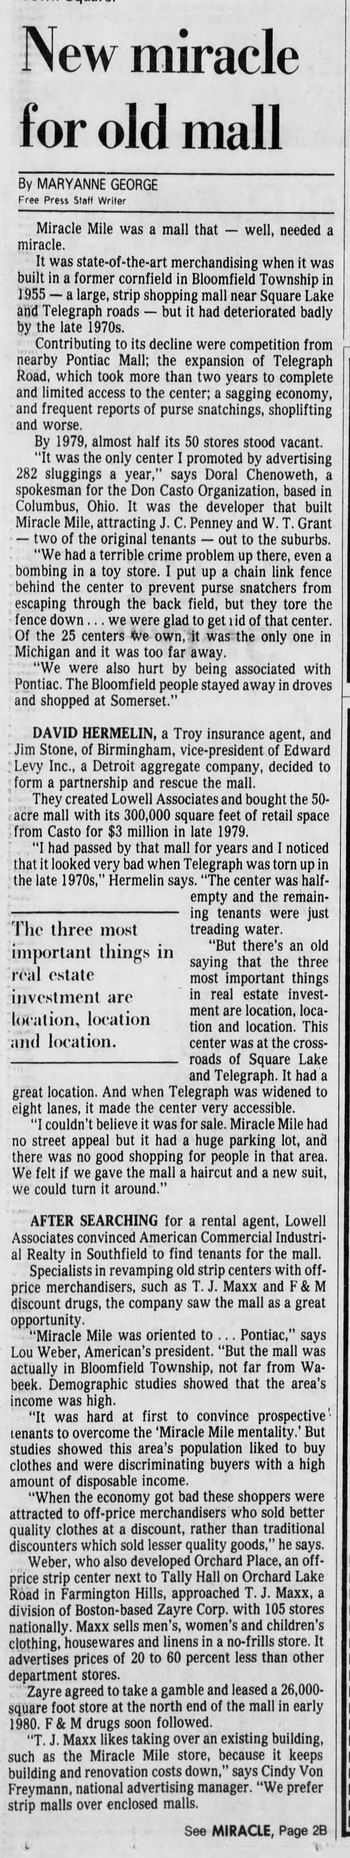 Miracle Mile Shopping Center - 1983 Article On Name Change To Bloomfield Town Square